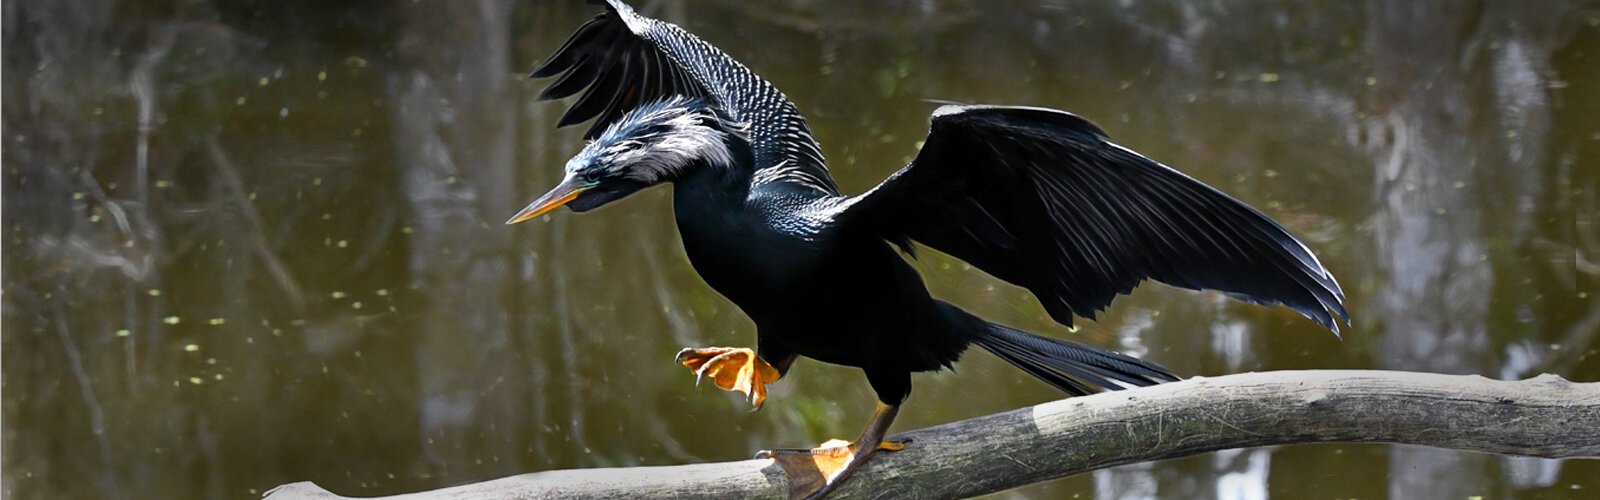  A male anhinga in breeding plumage walks with determination on a branch over the Banana Creek Canal.